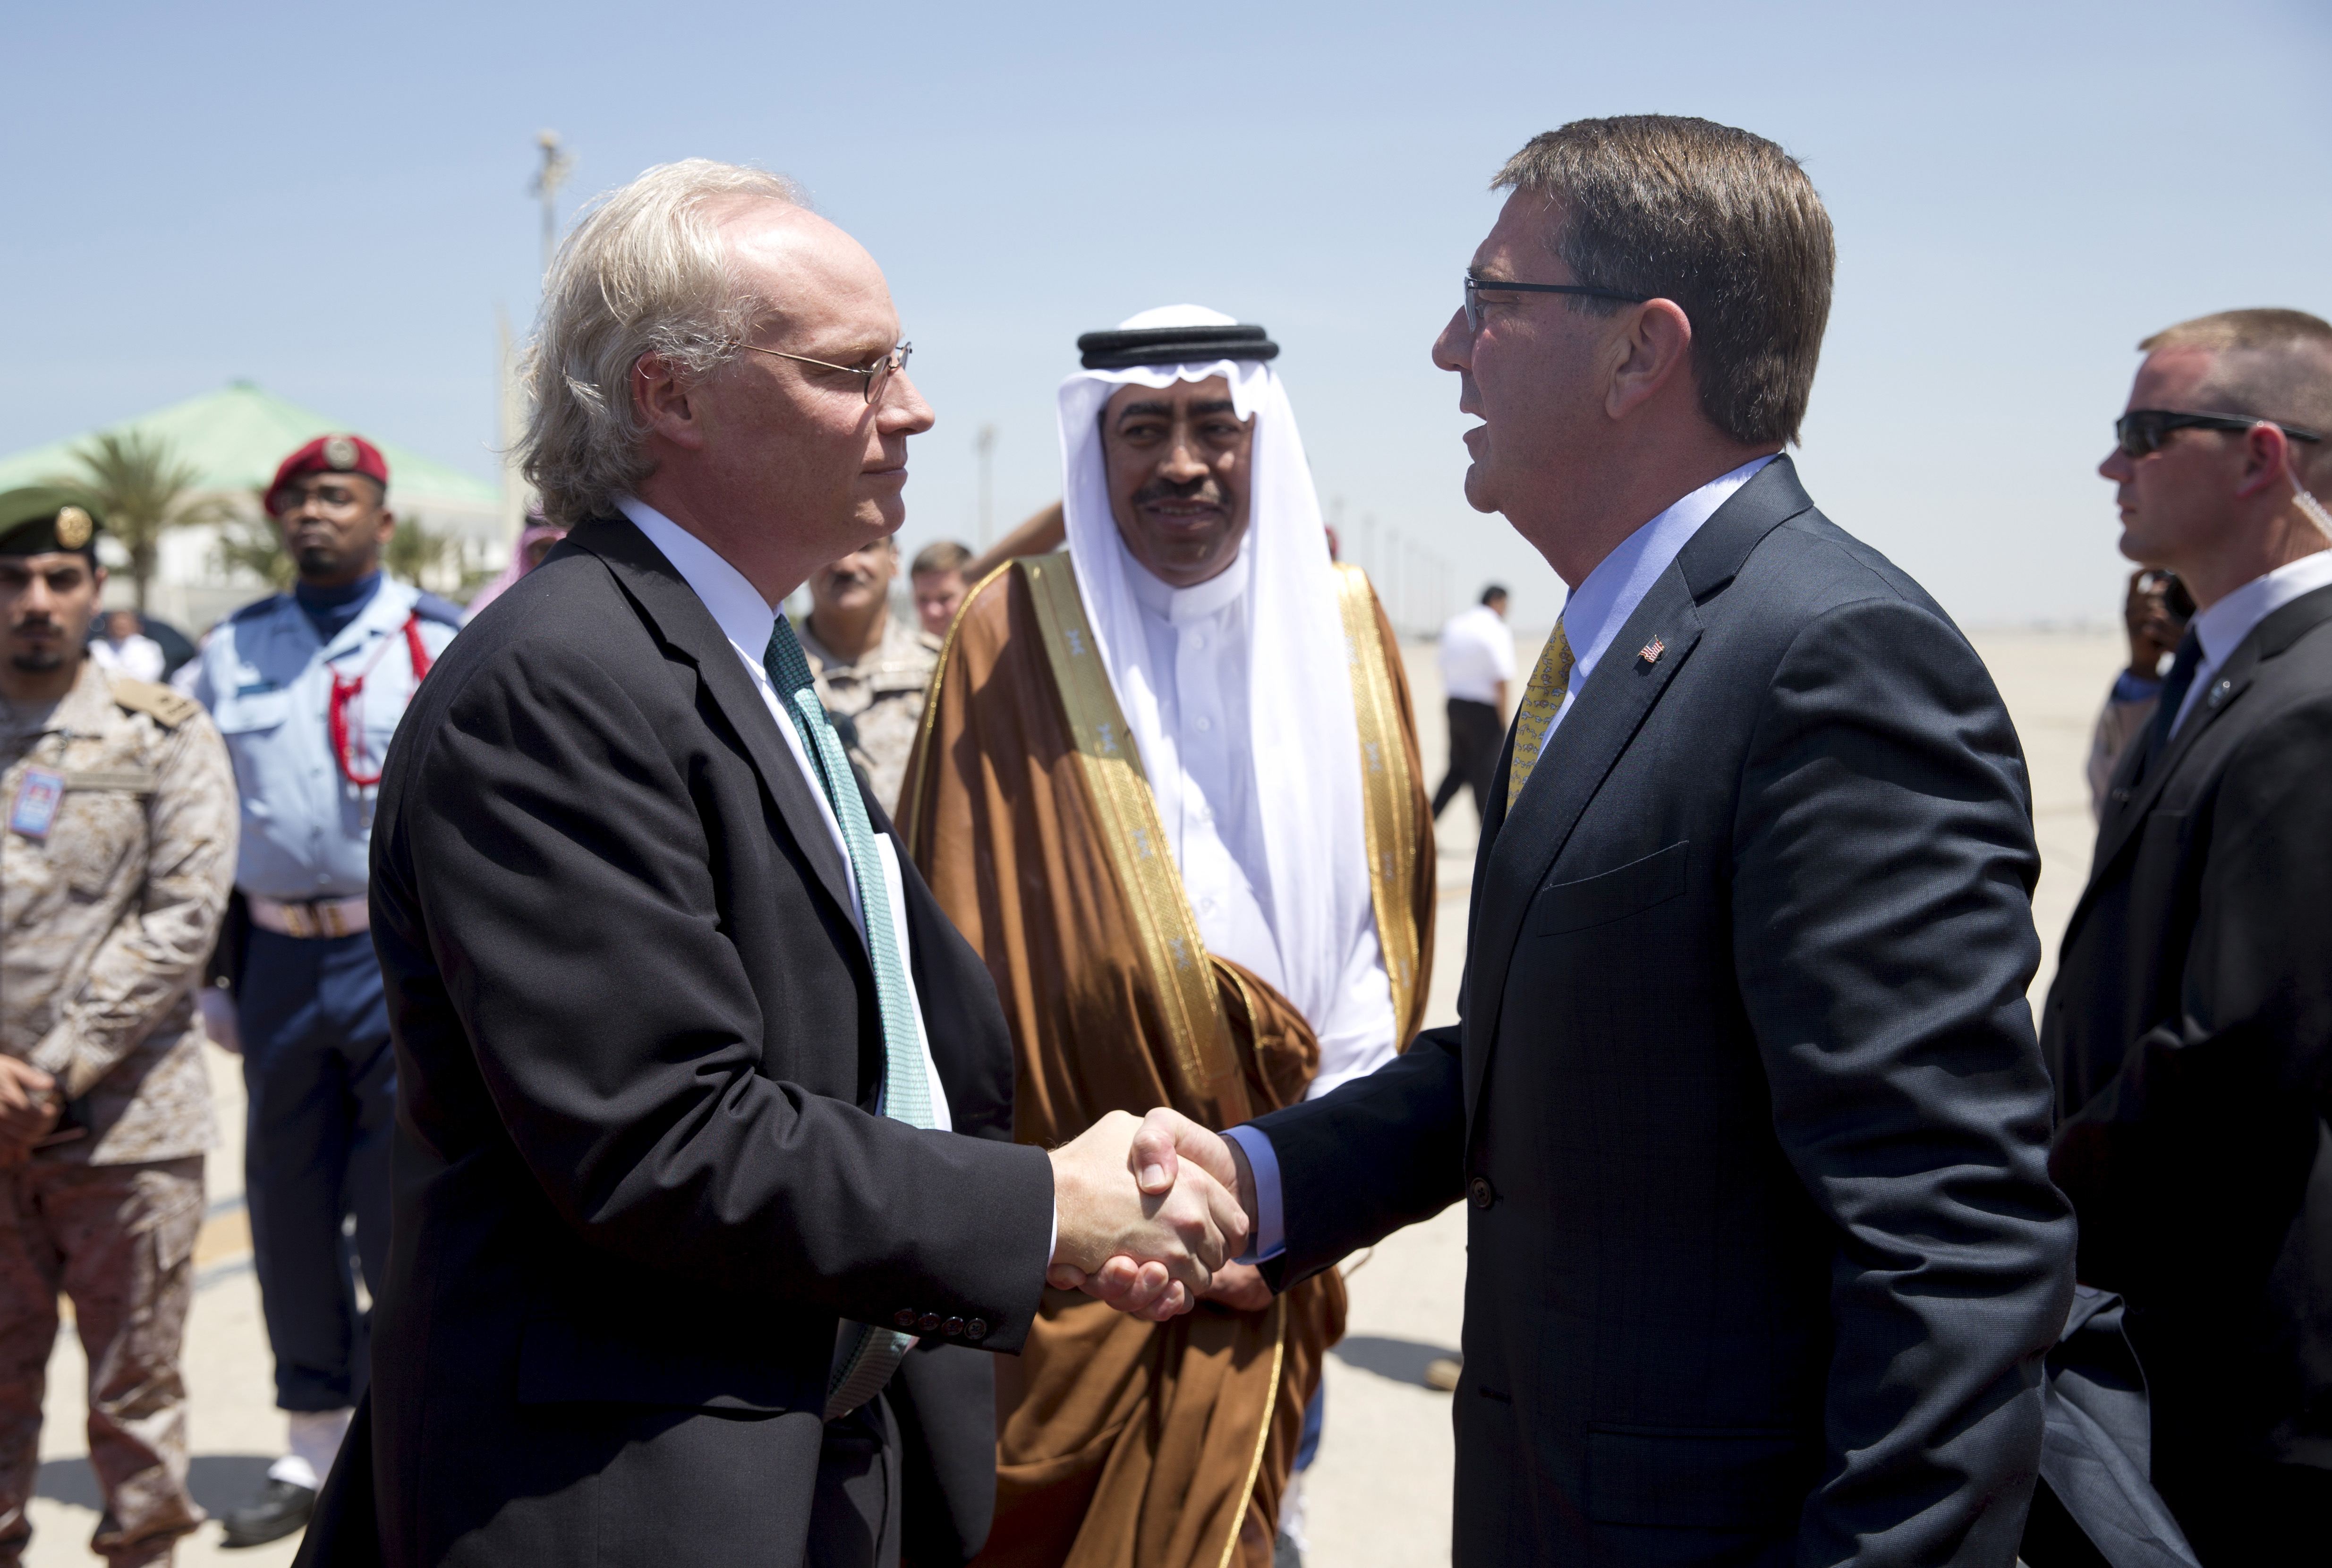 U.S. Defense Secretary Carter is greeted by U.S. Embassy Deputy Chief of Mission Lenderking and Saudi Arabian Assistant Minister of Defense Ayesh upon arrival in Jeddah